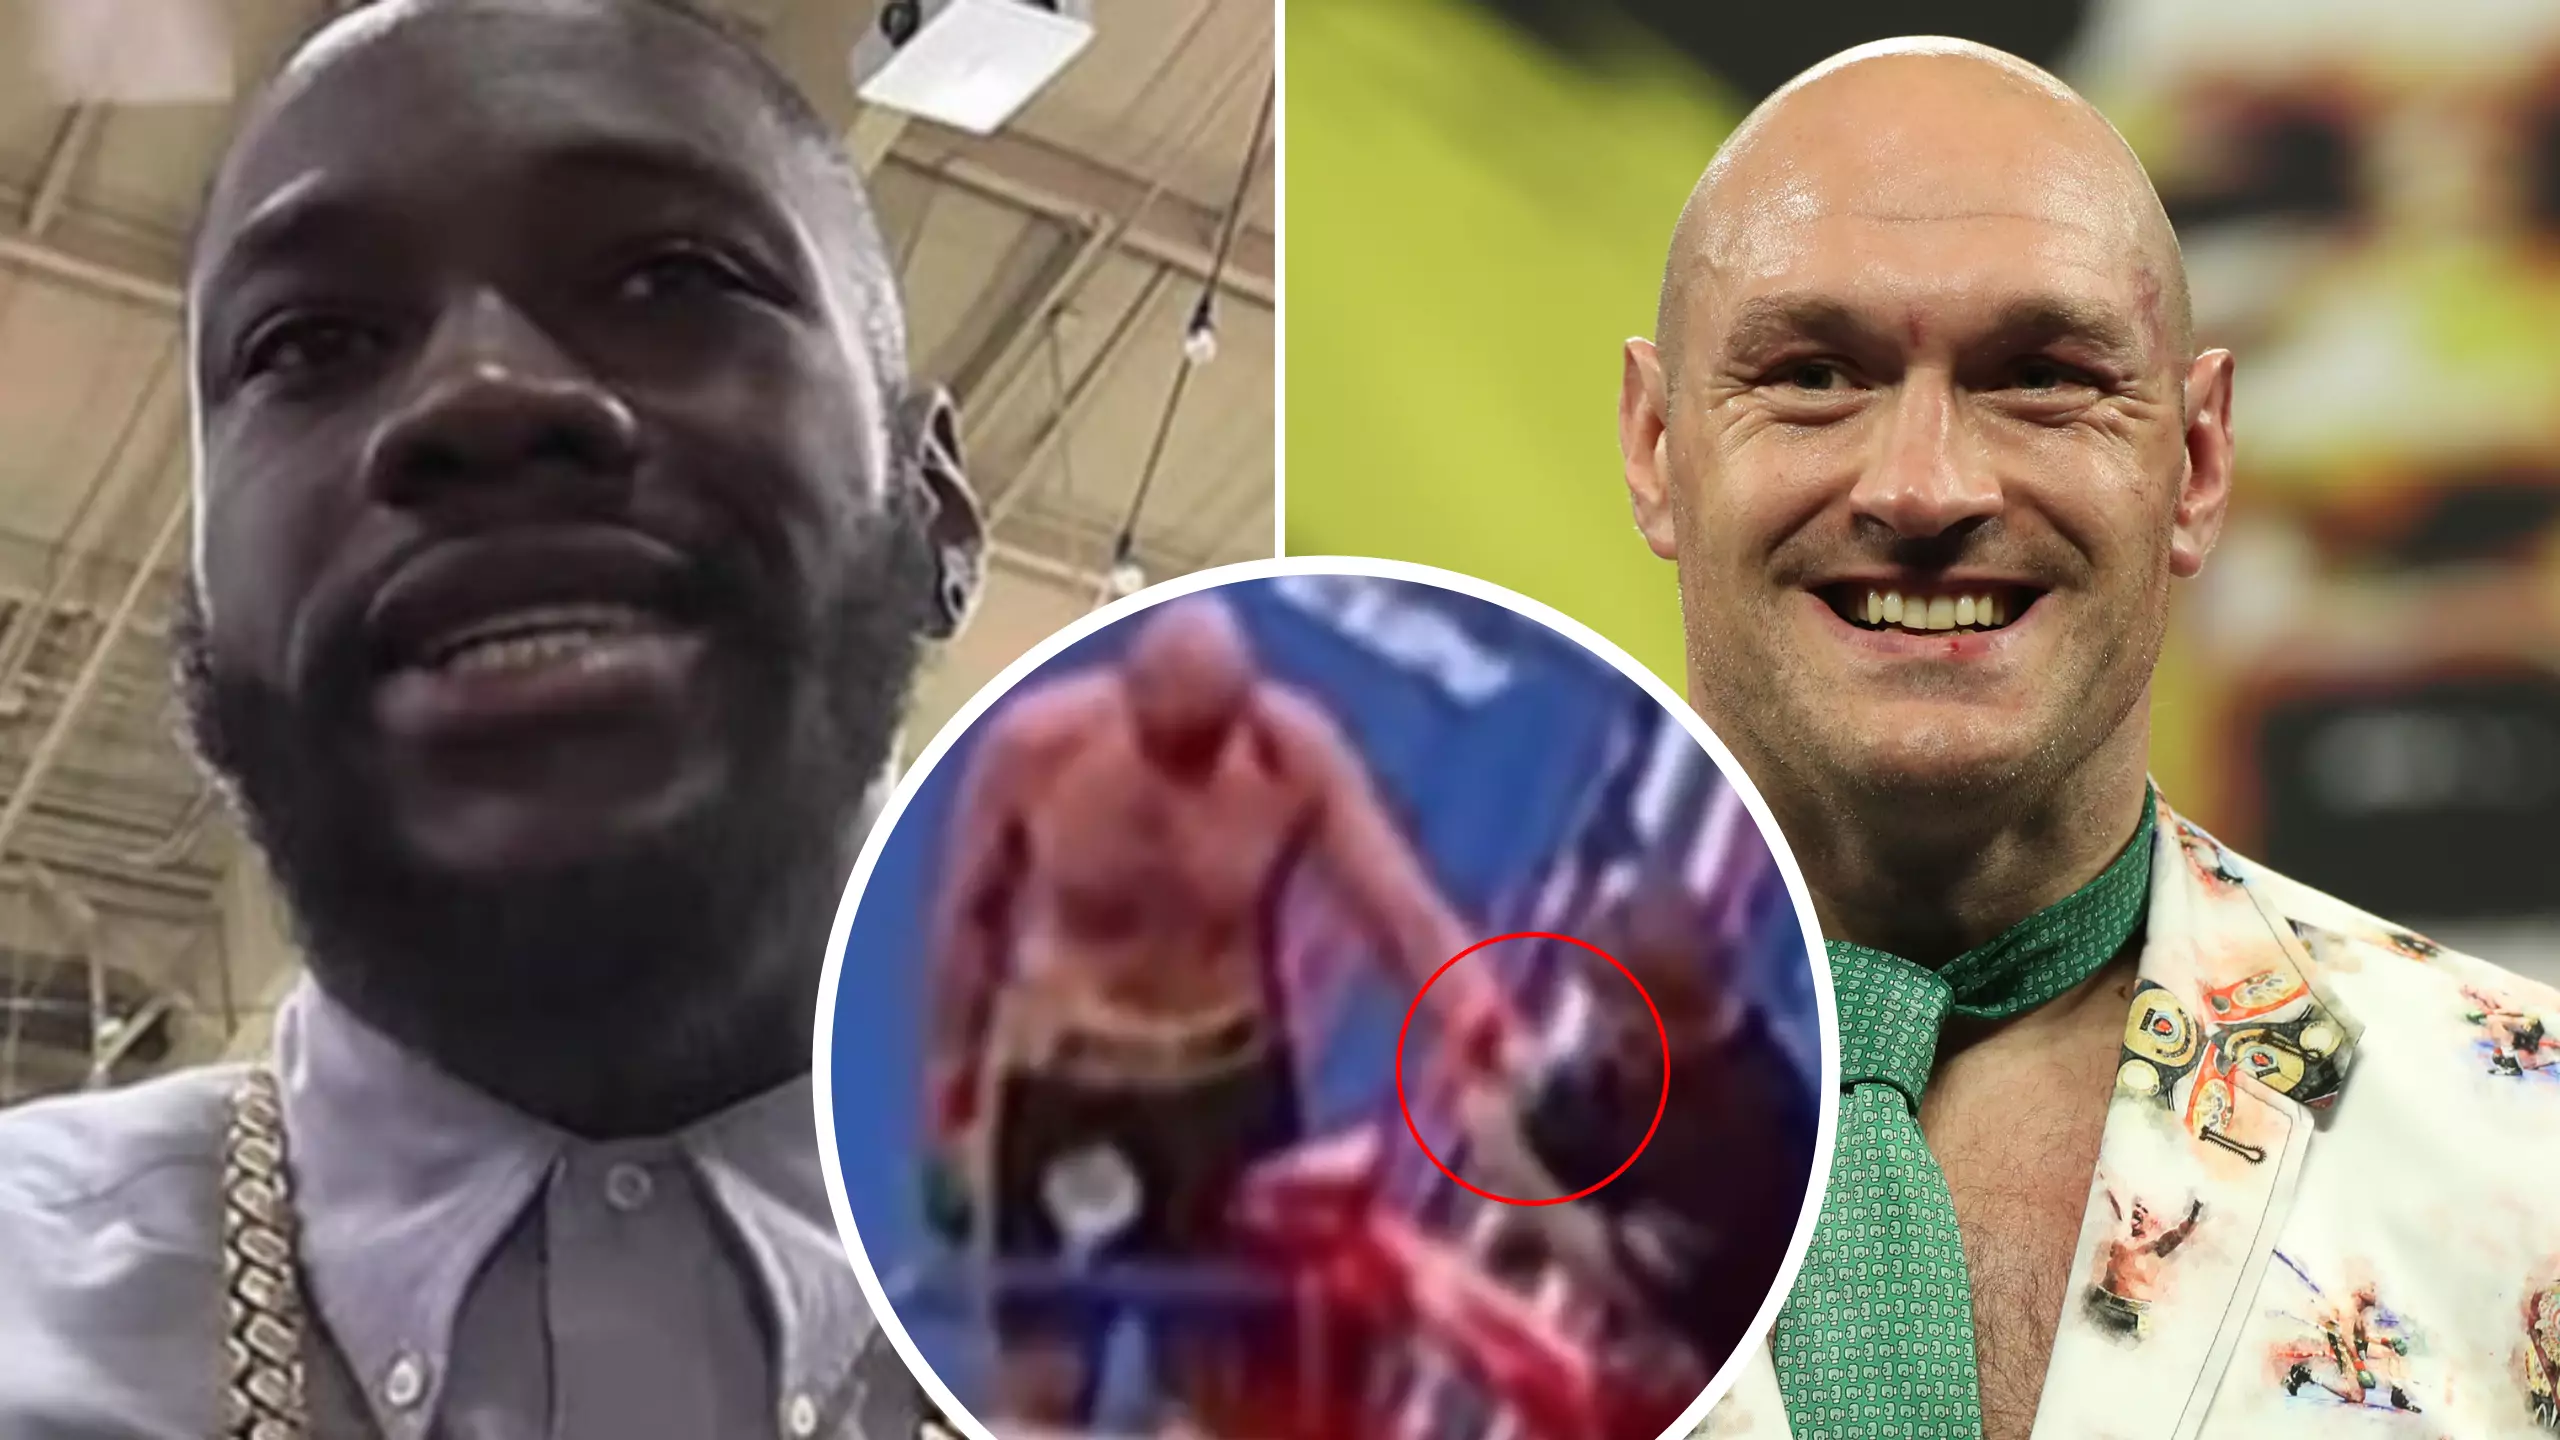 Deontay Wilder Sends Brutal 'Funeral Arrangements' Warning To Tyson Fury In Fresh Attack